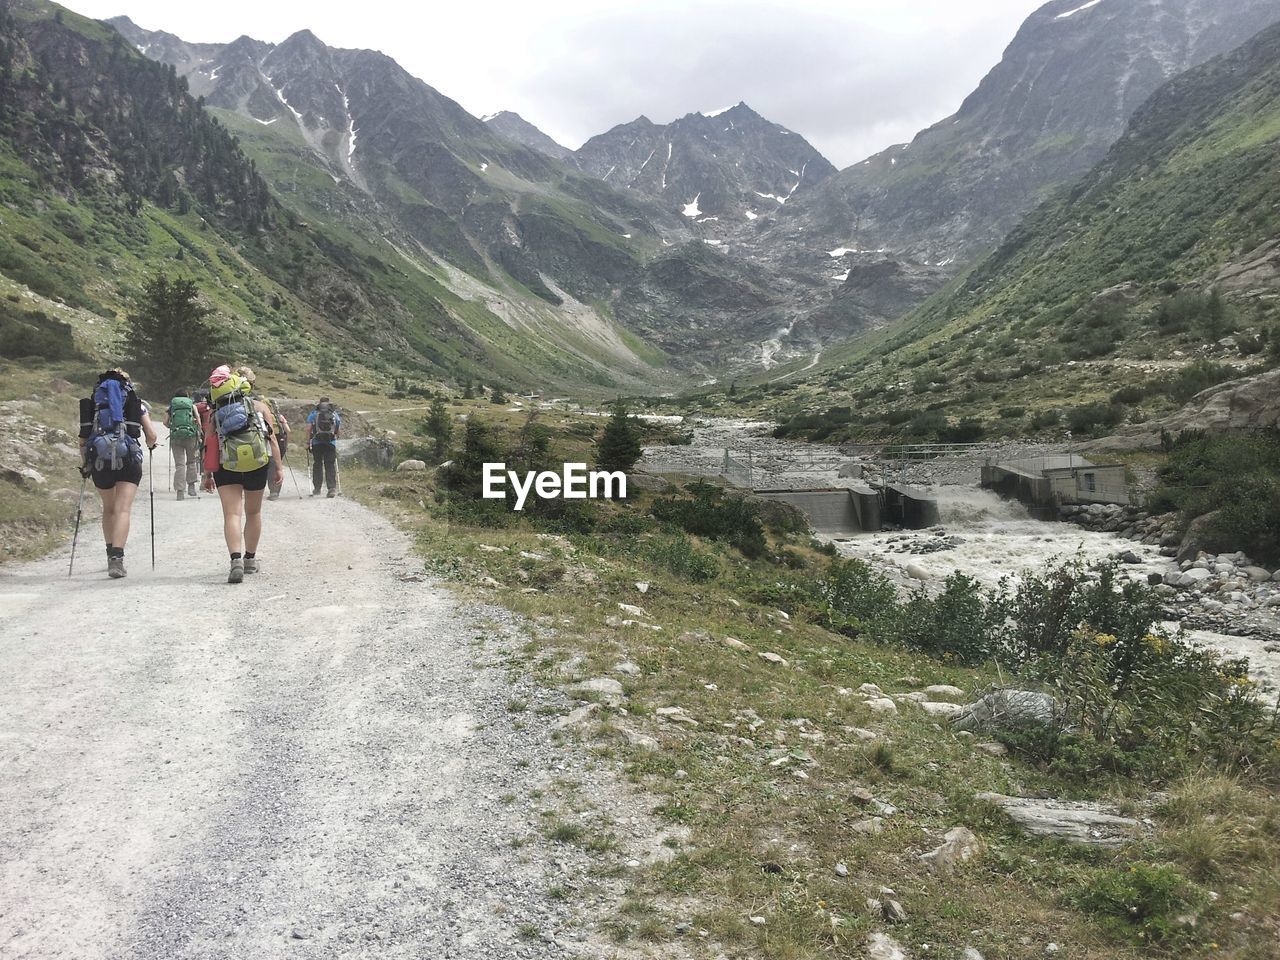 PEOPLE WALKING ON ROAD BY MOUNTAINS